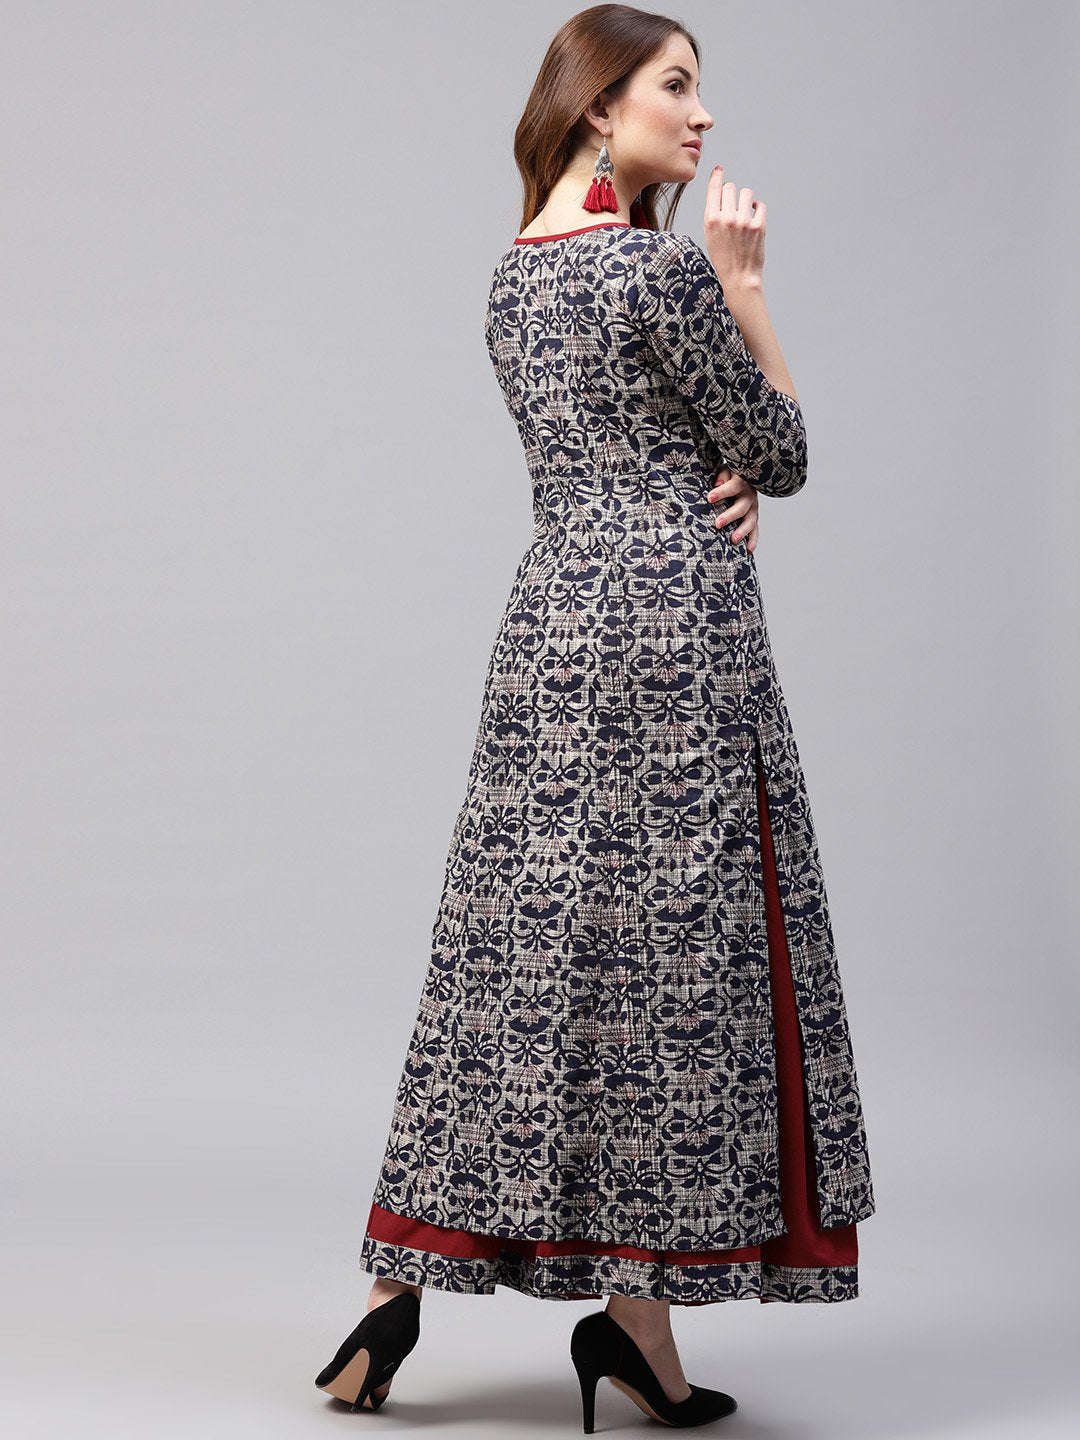 Women's Blue printed 3/4th sleeve cotton kurta with red flared skirt - Nayo Clothing